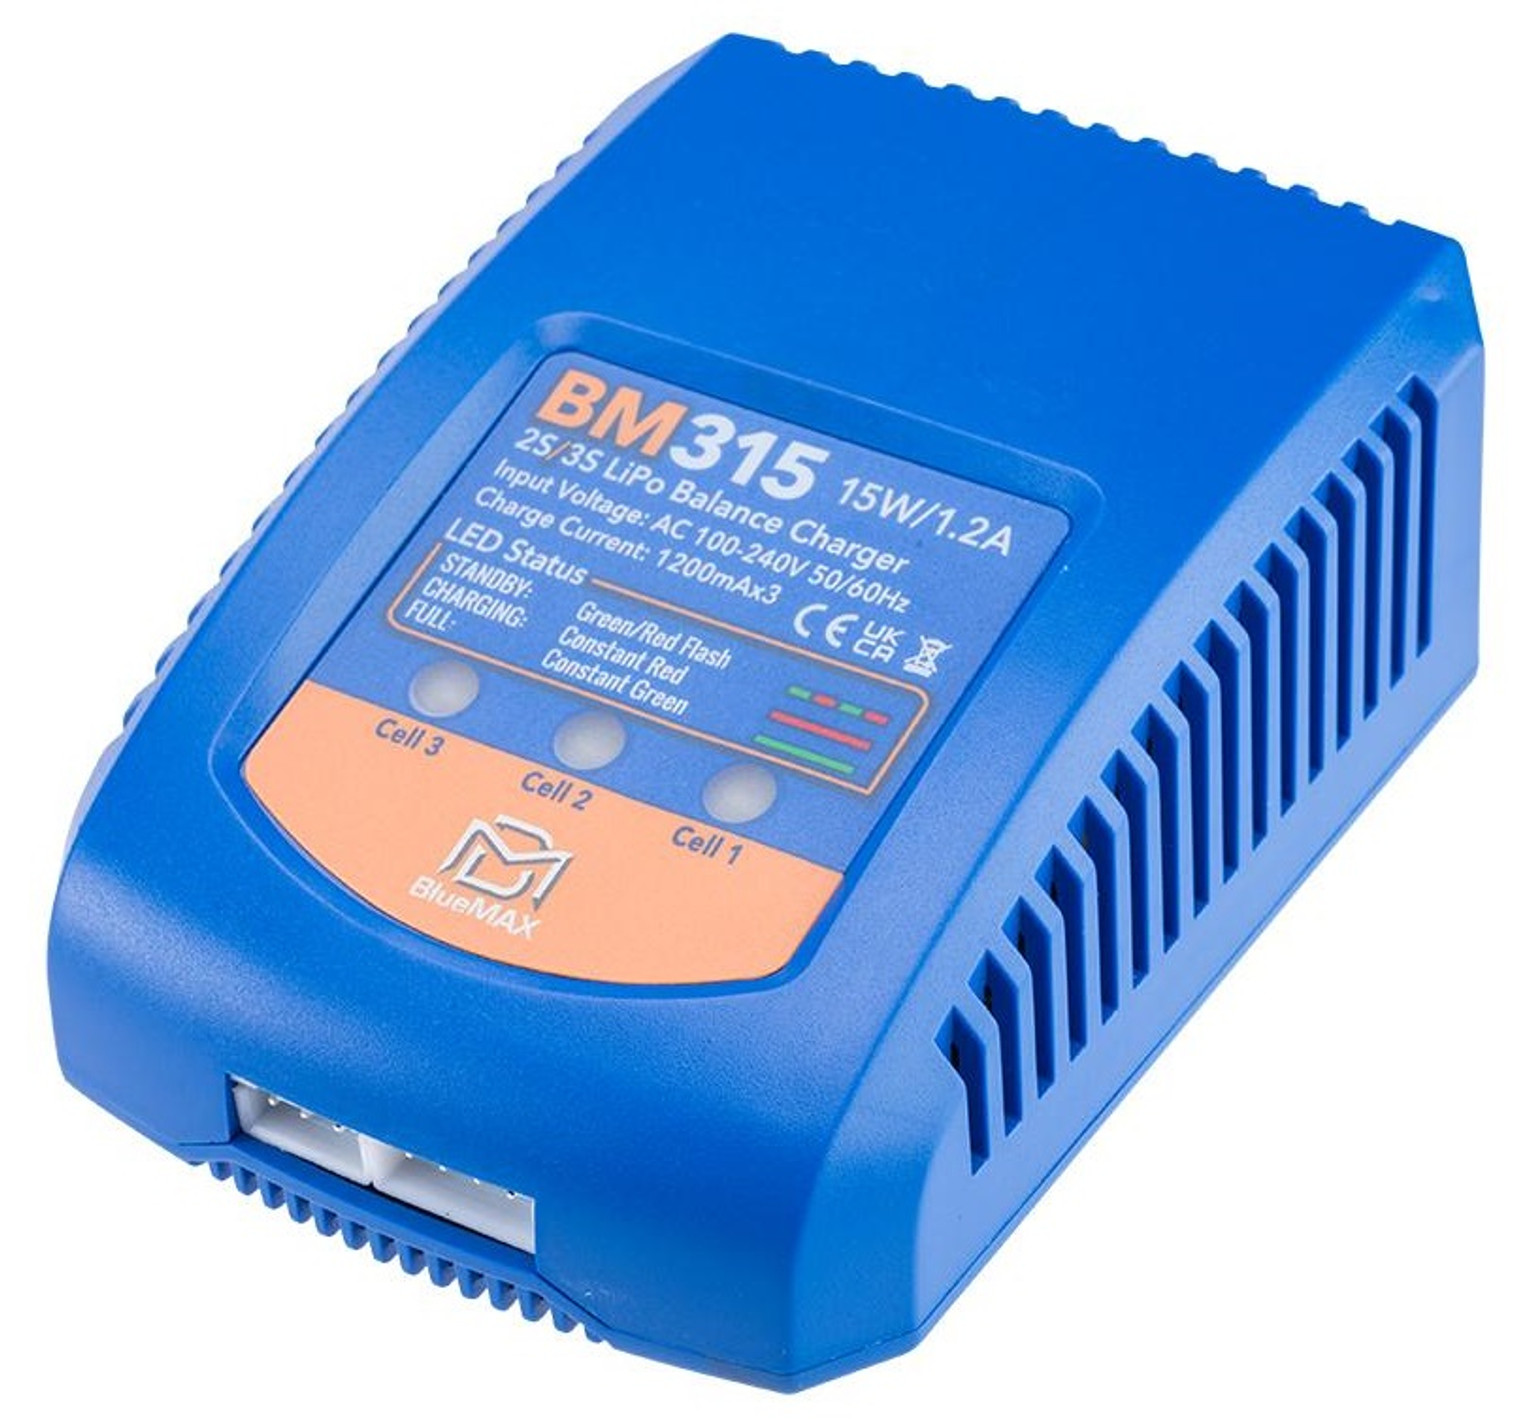 BlueMax BM315 Compact Balance Charger for Rechargeable LiPo Batteries